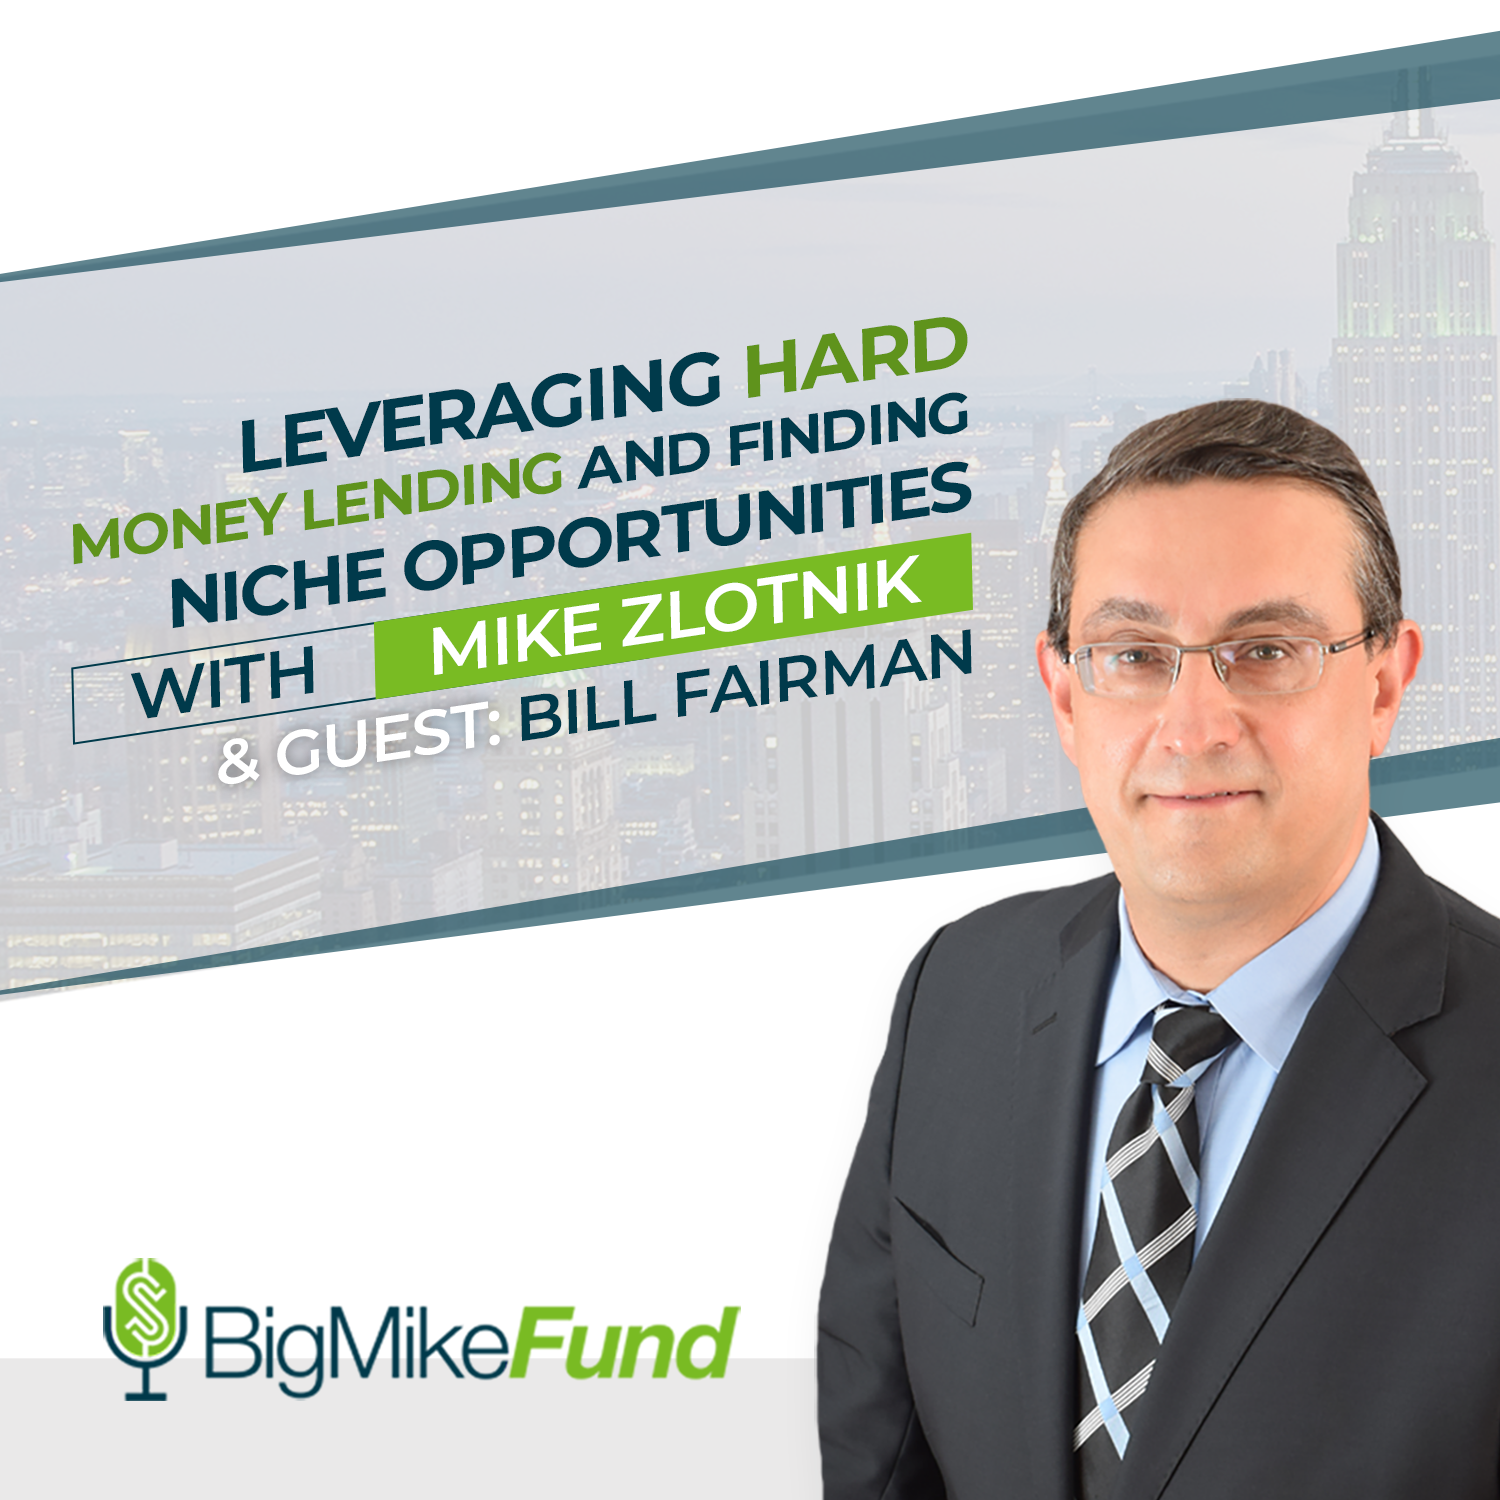 131: Leveraging Hard Money Lending and Finding Niche Opportunities with Bill Fairman